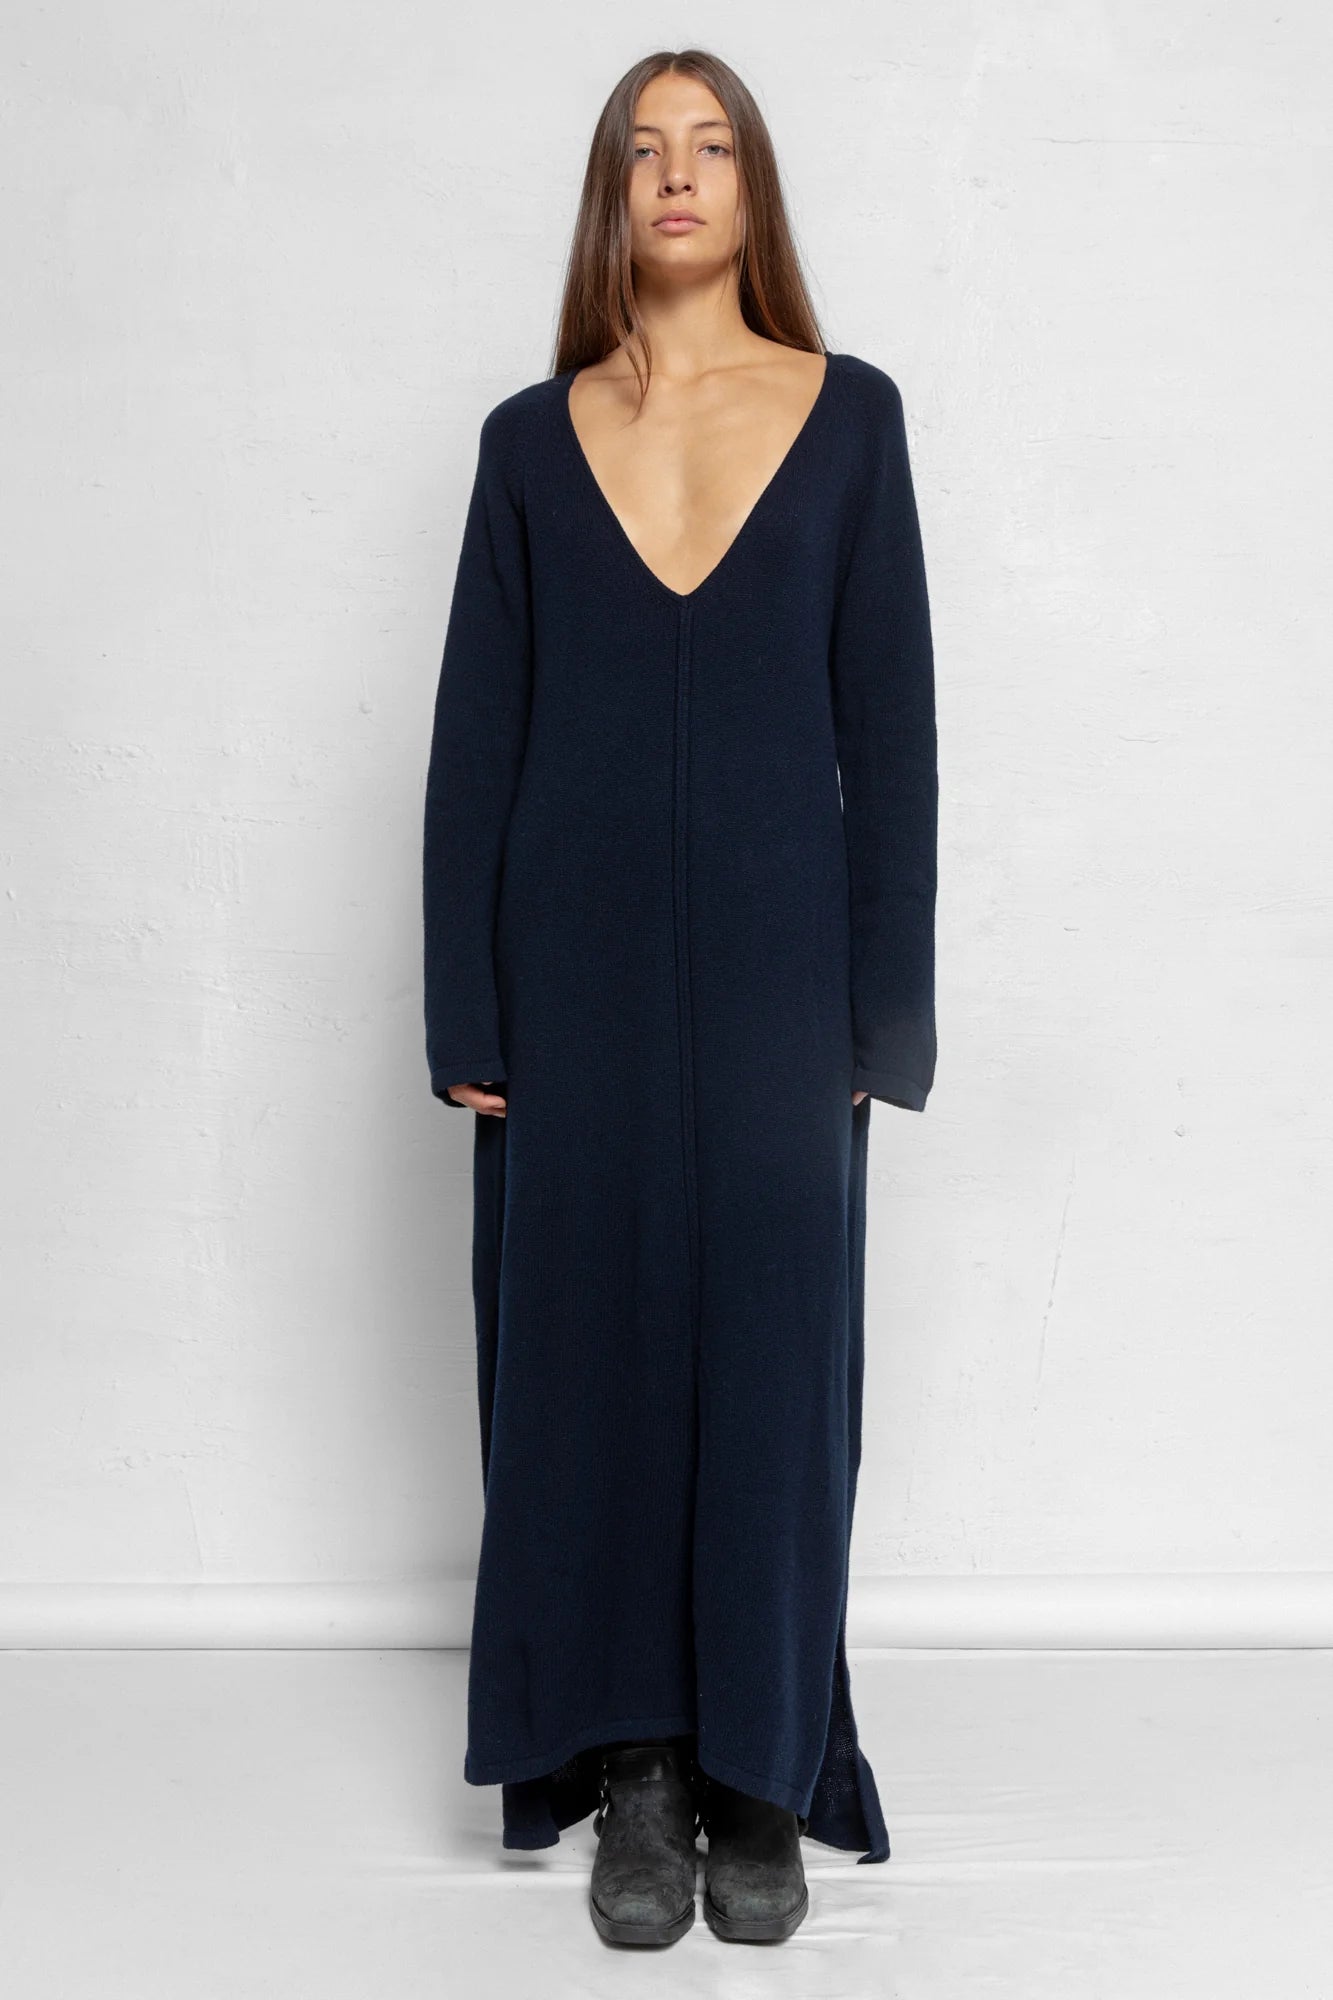 Janis deep v-neck cashmere knitted dresss by Can Pep Rey